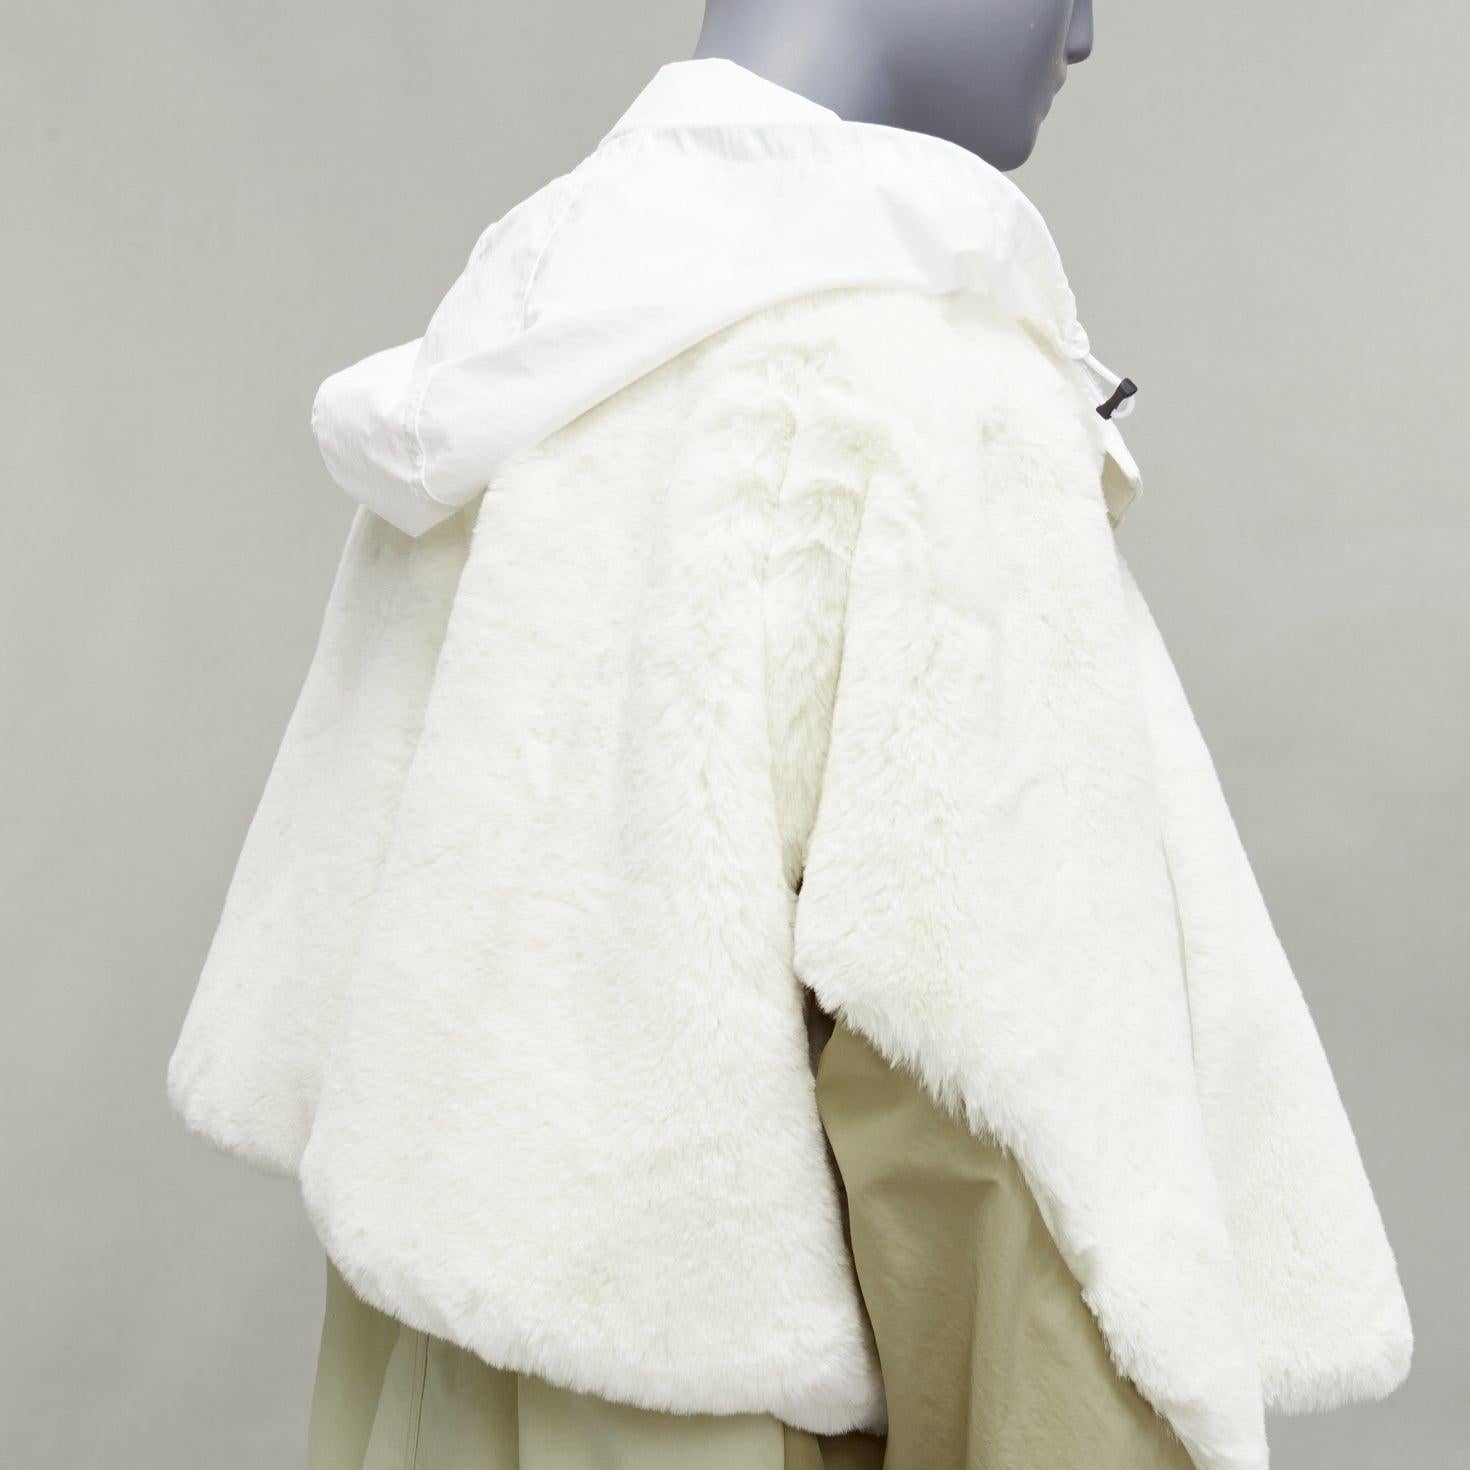 TOGA PULLA white nylon cream faux fur layered deconstructed parka jacket FR36 S
Reference: JYLM/A00056
Brand: Toga Archives
Collection: PULLA
Material: Nylon, Faux Fur
Color: White, Khaki
Pattern: Solid
Closure: Zip
Lining: White Mesh
Extra Details: